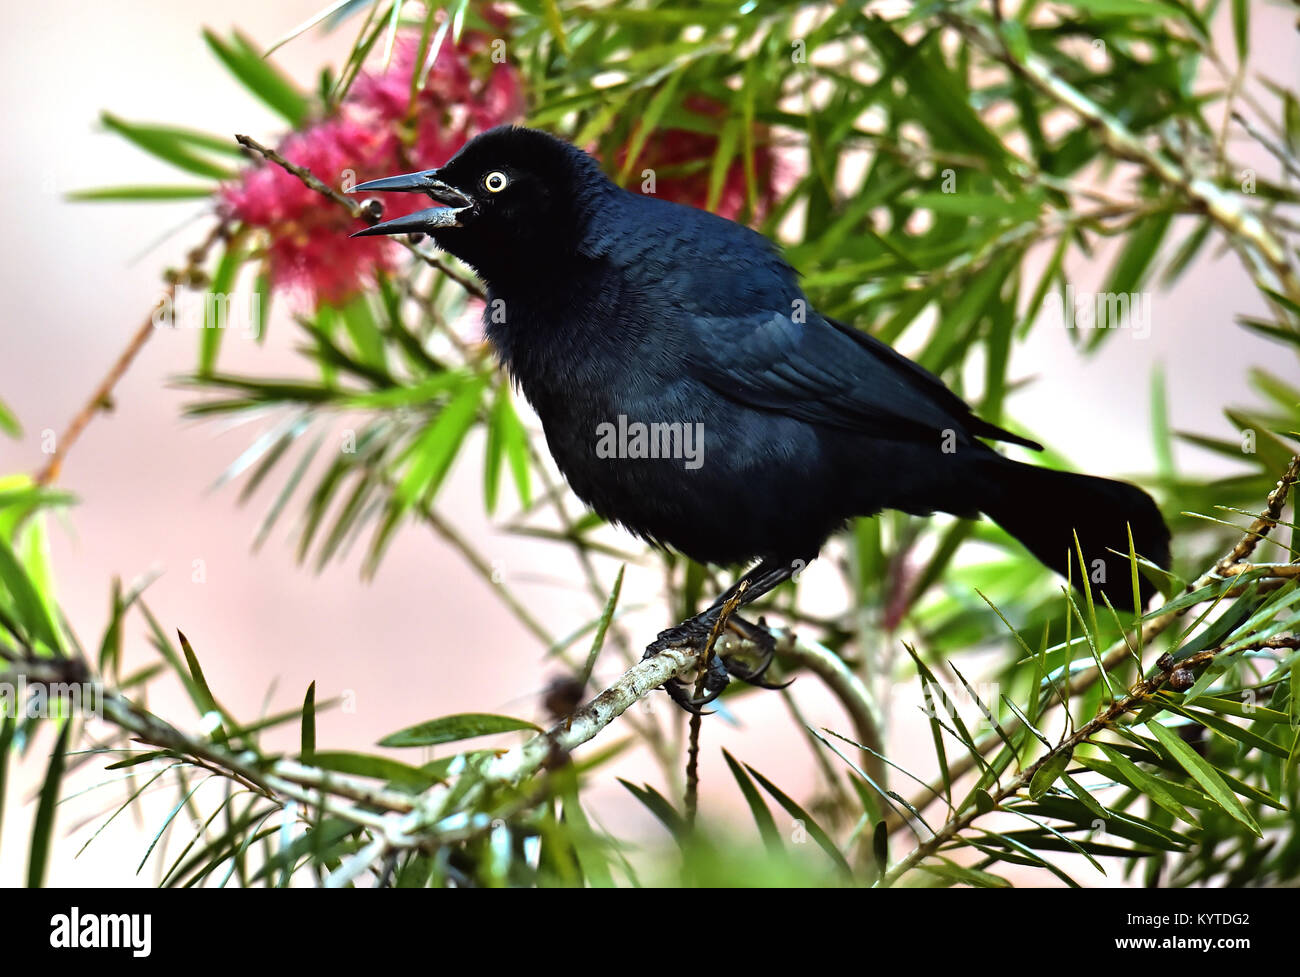 The Greater Antillean grackle (Quiscalus niger) perched on branch at La Boca, Republic of Cuba in March Stock Photo